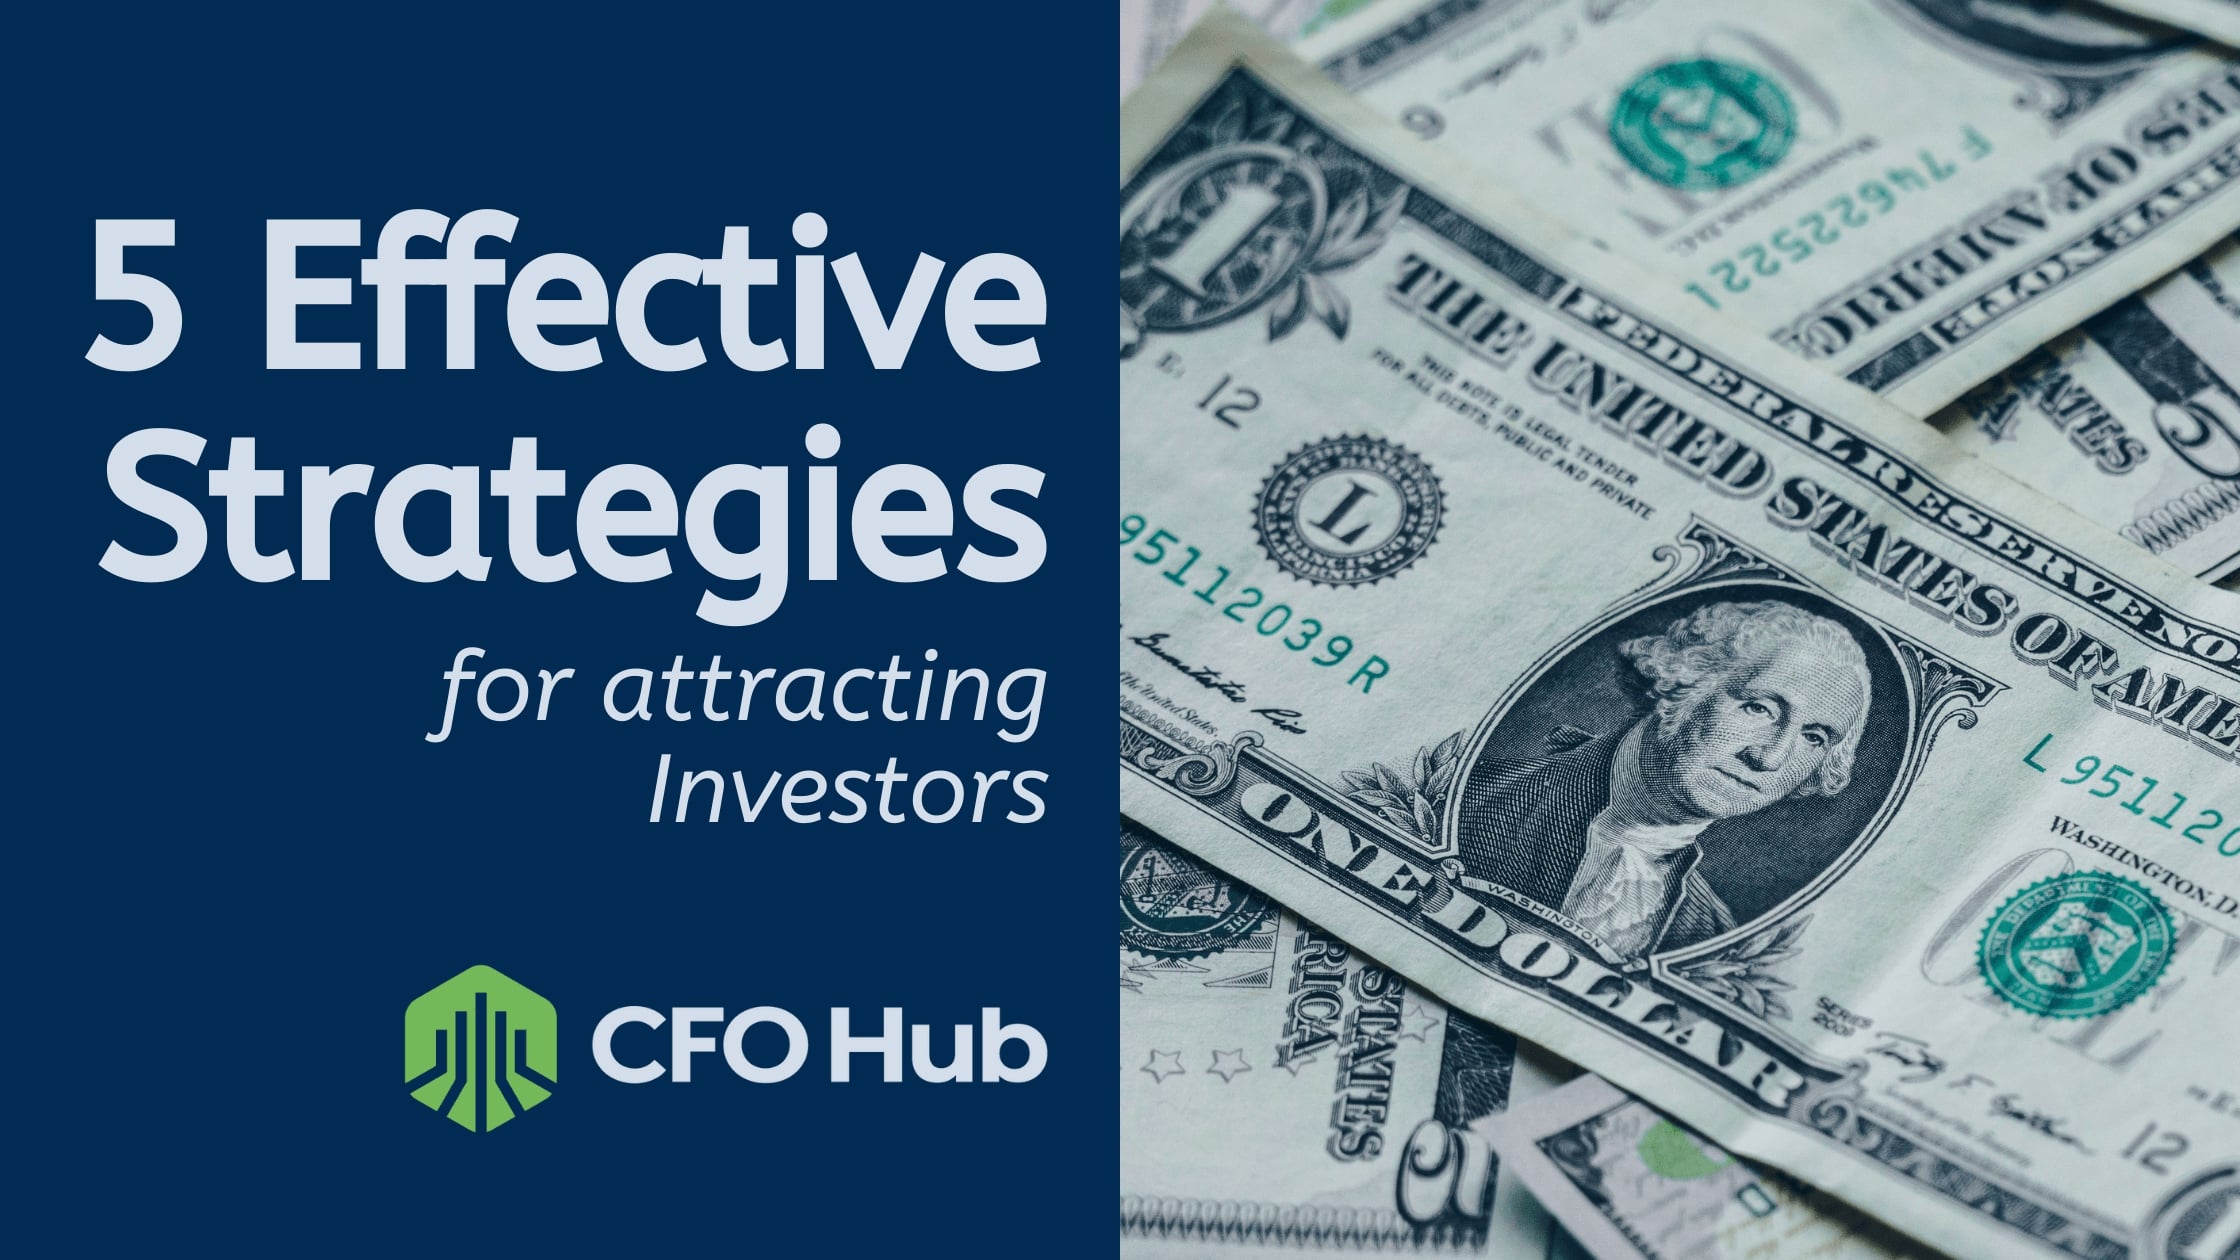 Image with a blue background on the left and a close-up of U.S. dollar bills on the right. The blue side reads, "5 Effective Strategies for Attracting Investors" and "CFO Hub" with a green logo. The dollar bills feature various denominations and an image of George Washington.